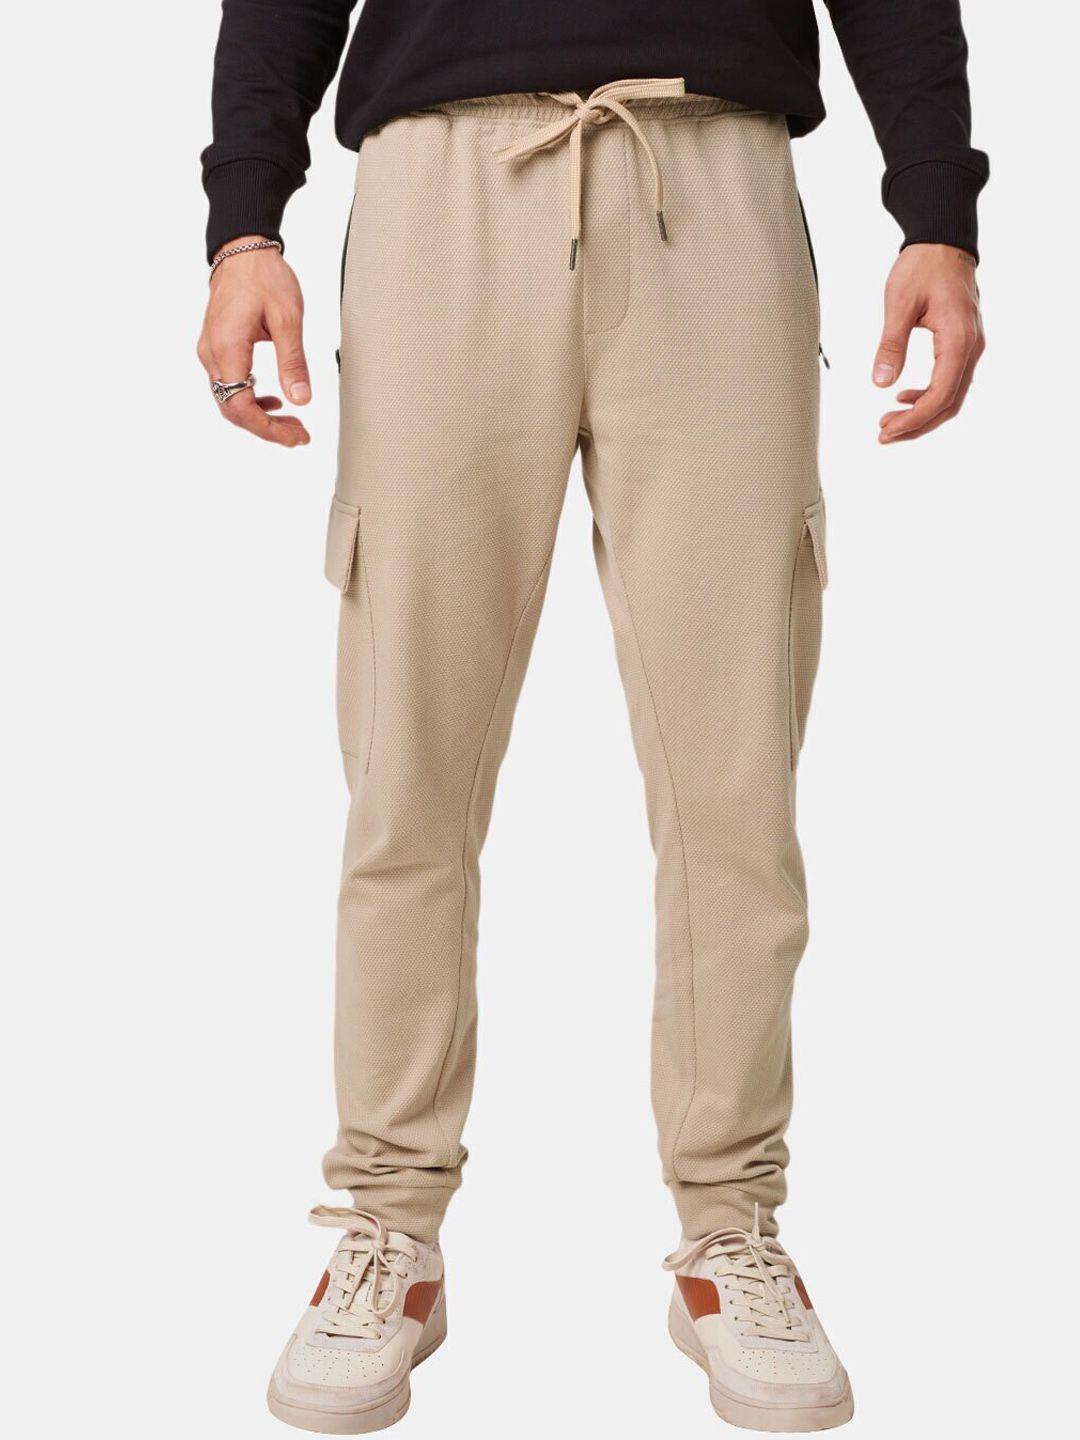 the souled store men solid mushroom cargo joggers